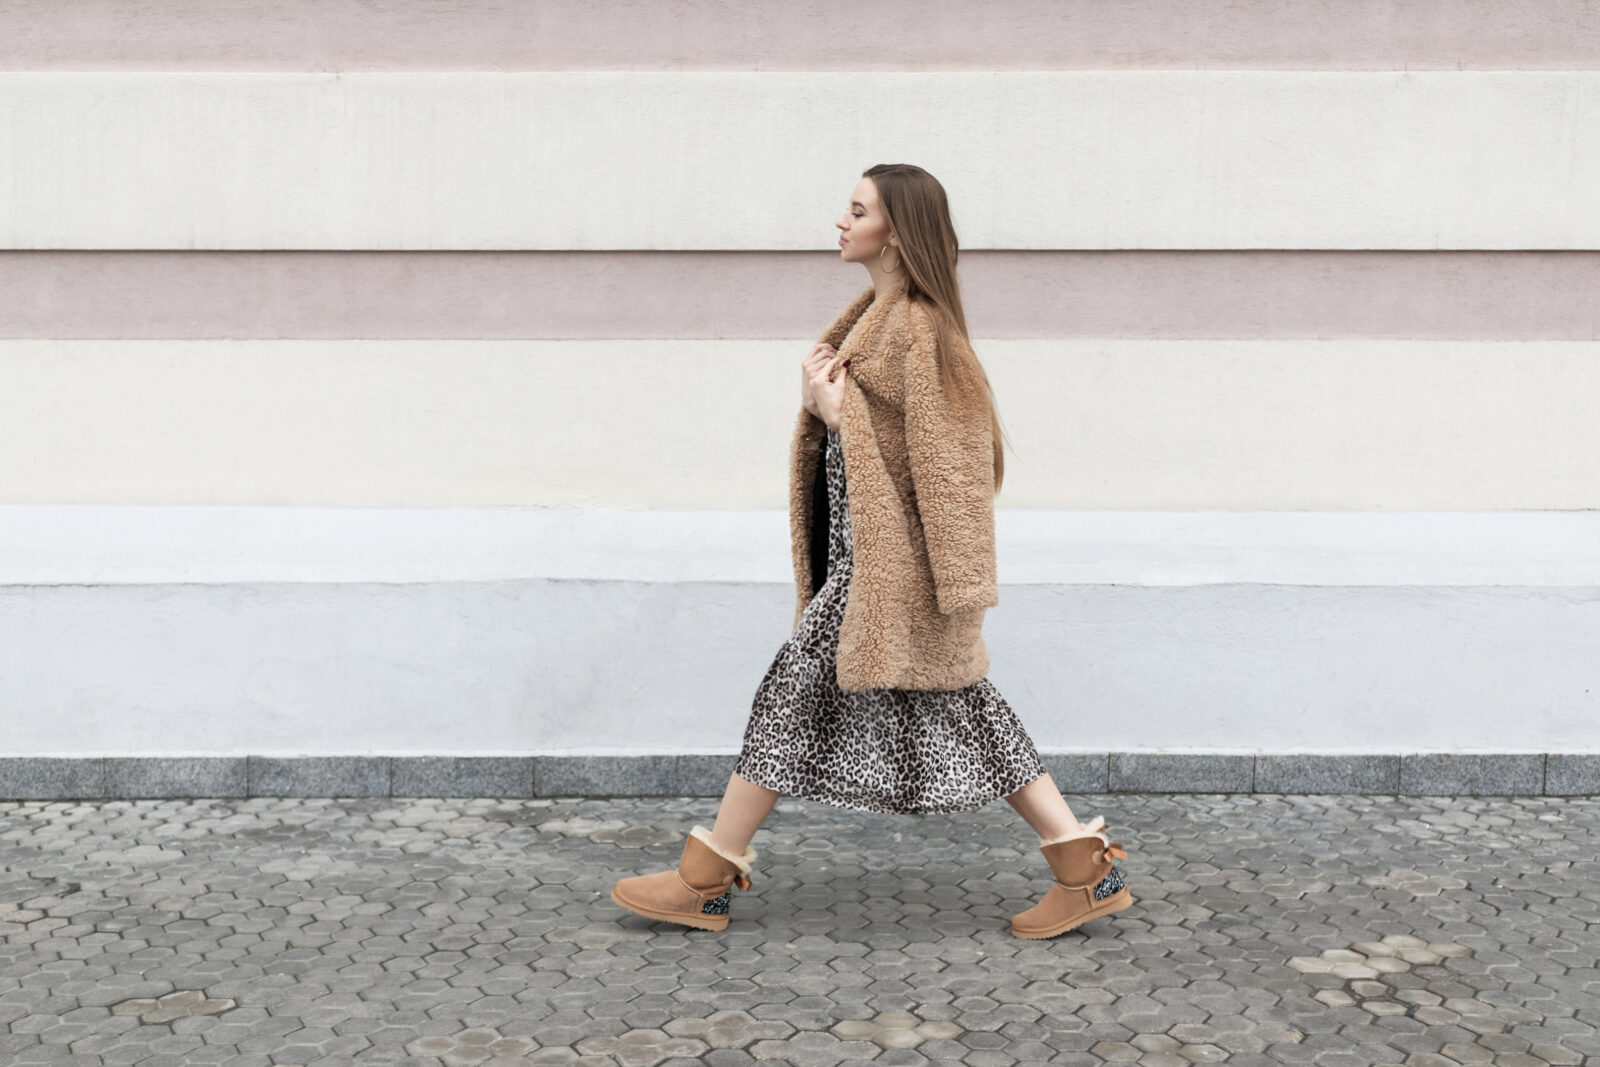 artificial fur coat, long leopard print dress, ugg boots, a small shoulder bag, a beautiful white model girl with long hair poses cheerfully walks on the street near the wall 2024/02/AdobeStock_304119895.jpeg 